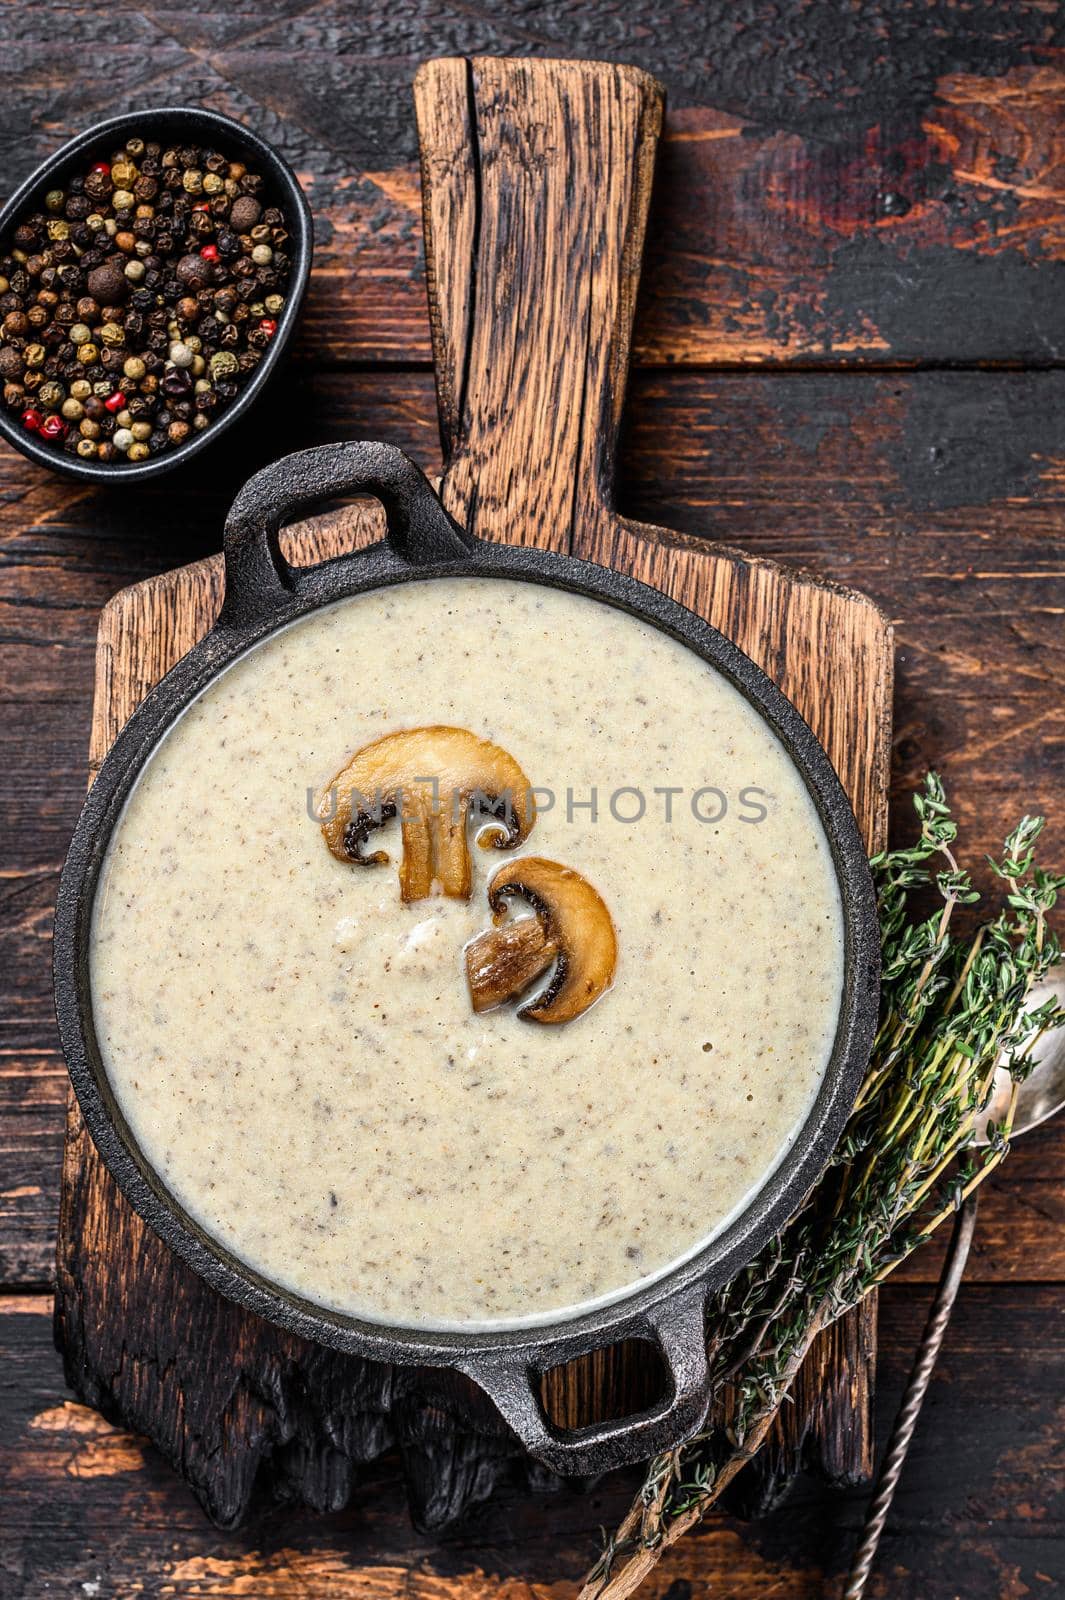 Mushroom cream soup with herbs and spices. Dark Wooden background. Top view.